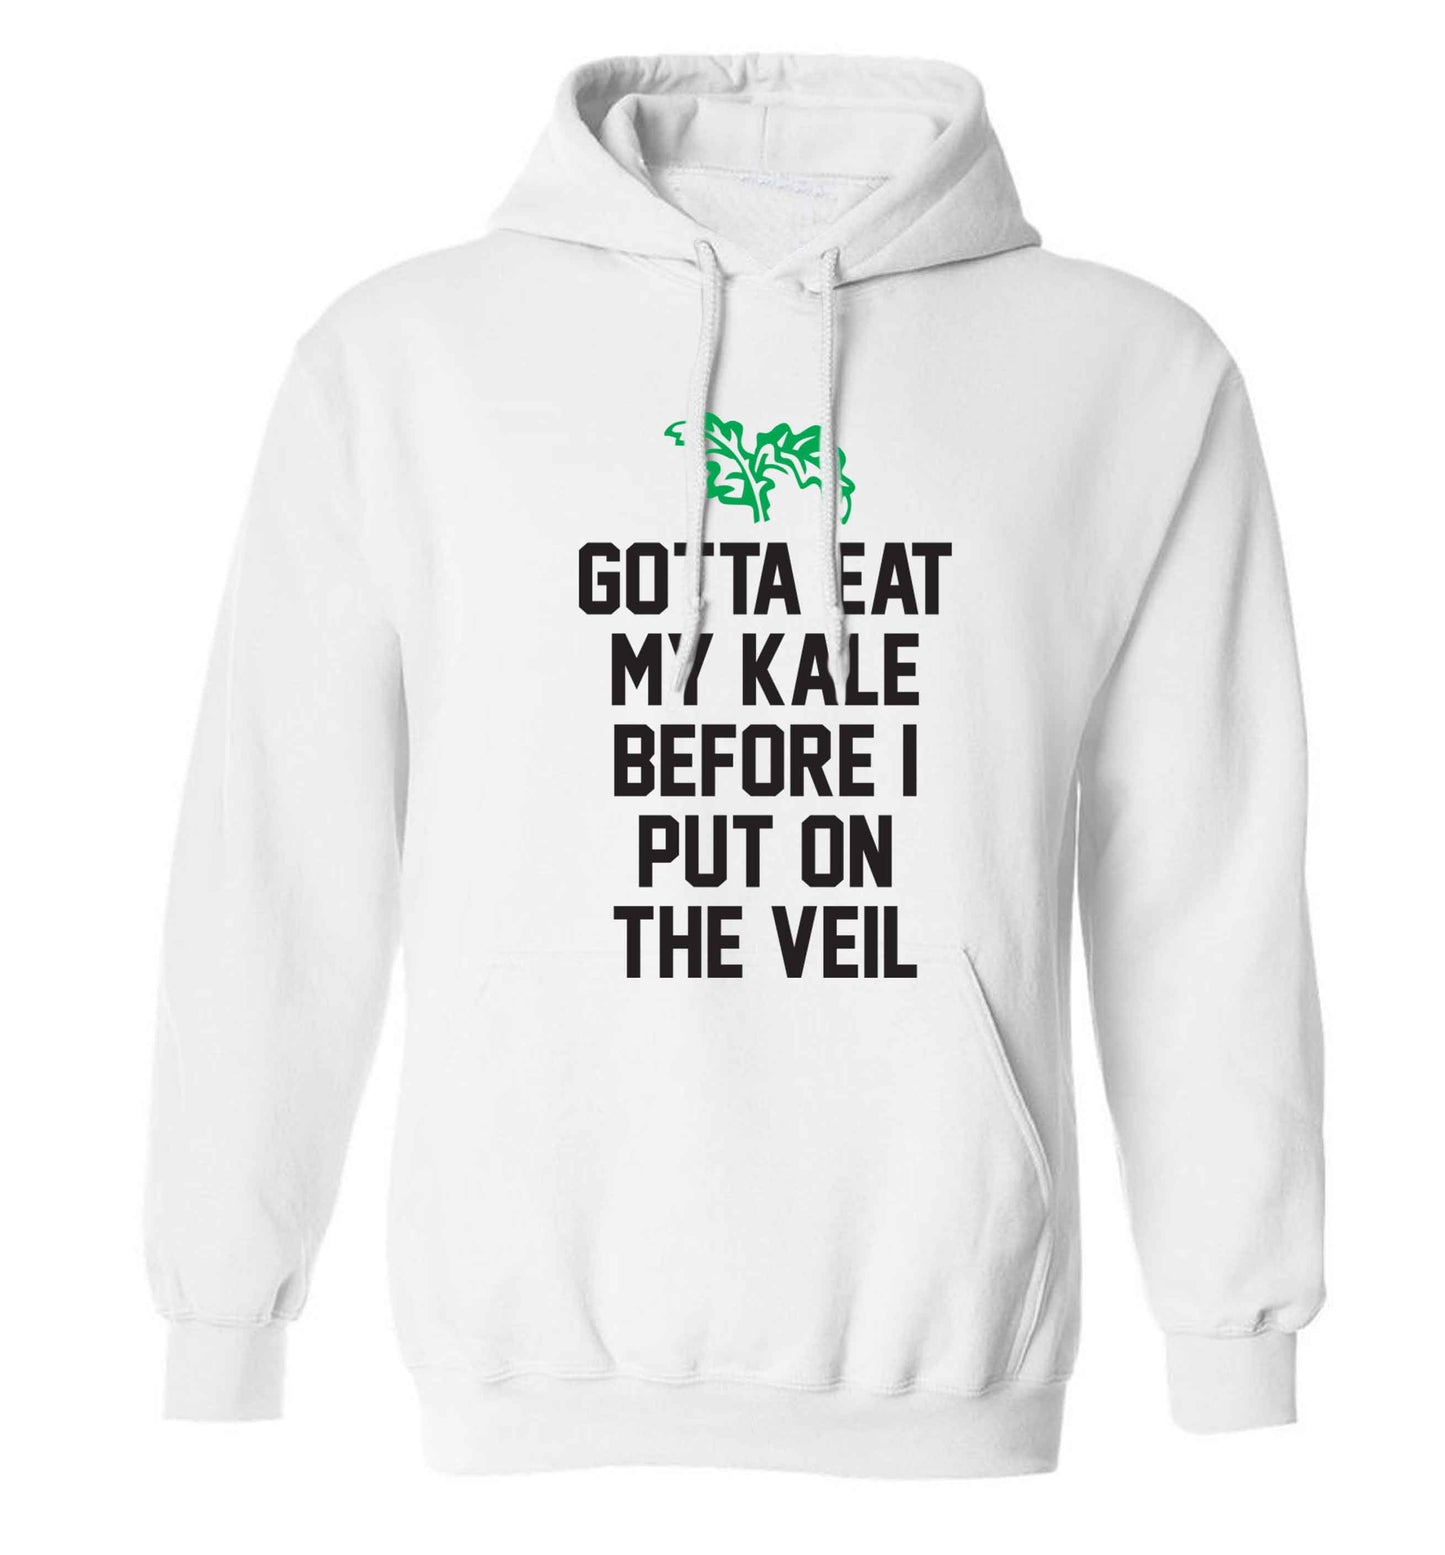 Gotta eat my kale before I put on the veil adults unisex white hoodie 2XL